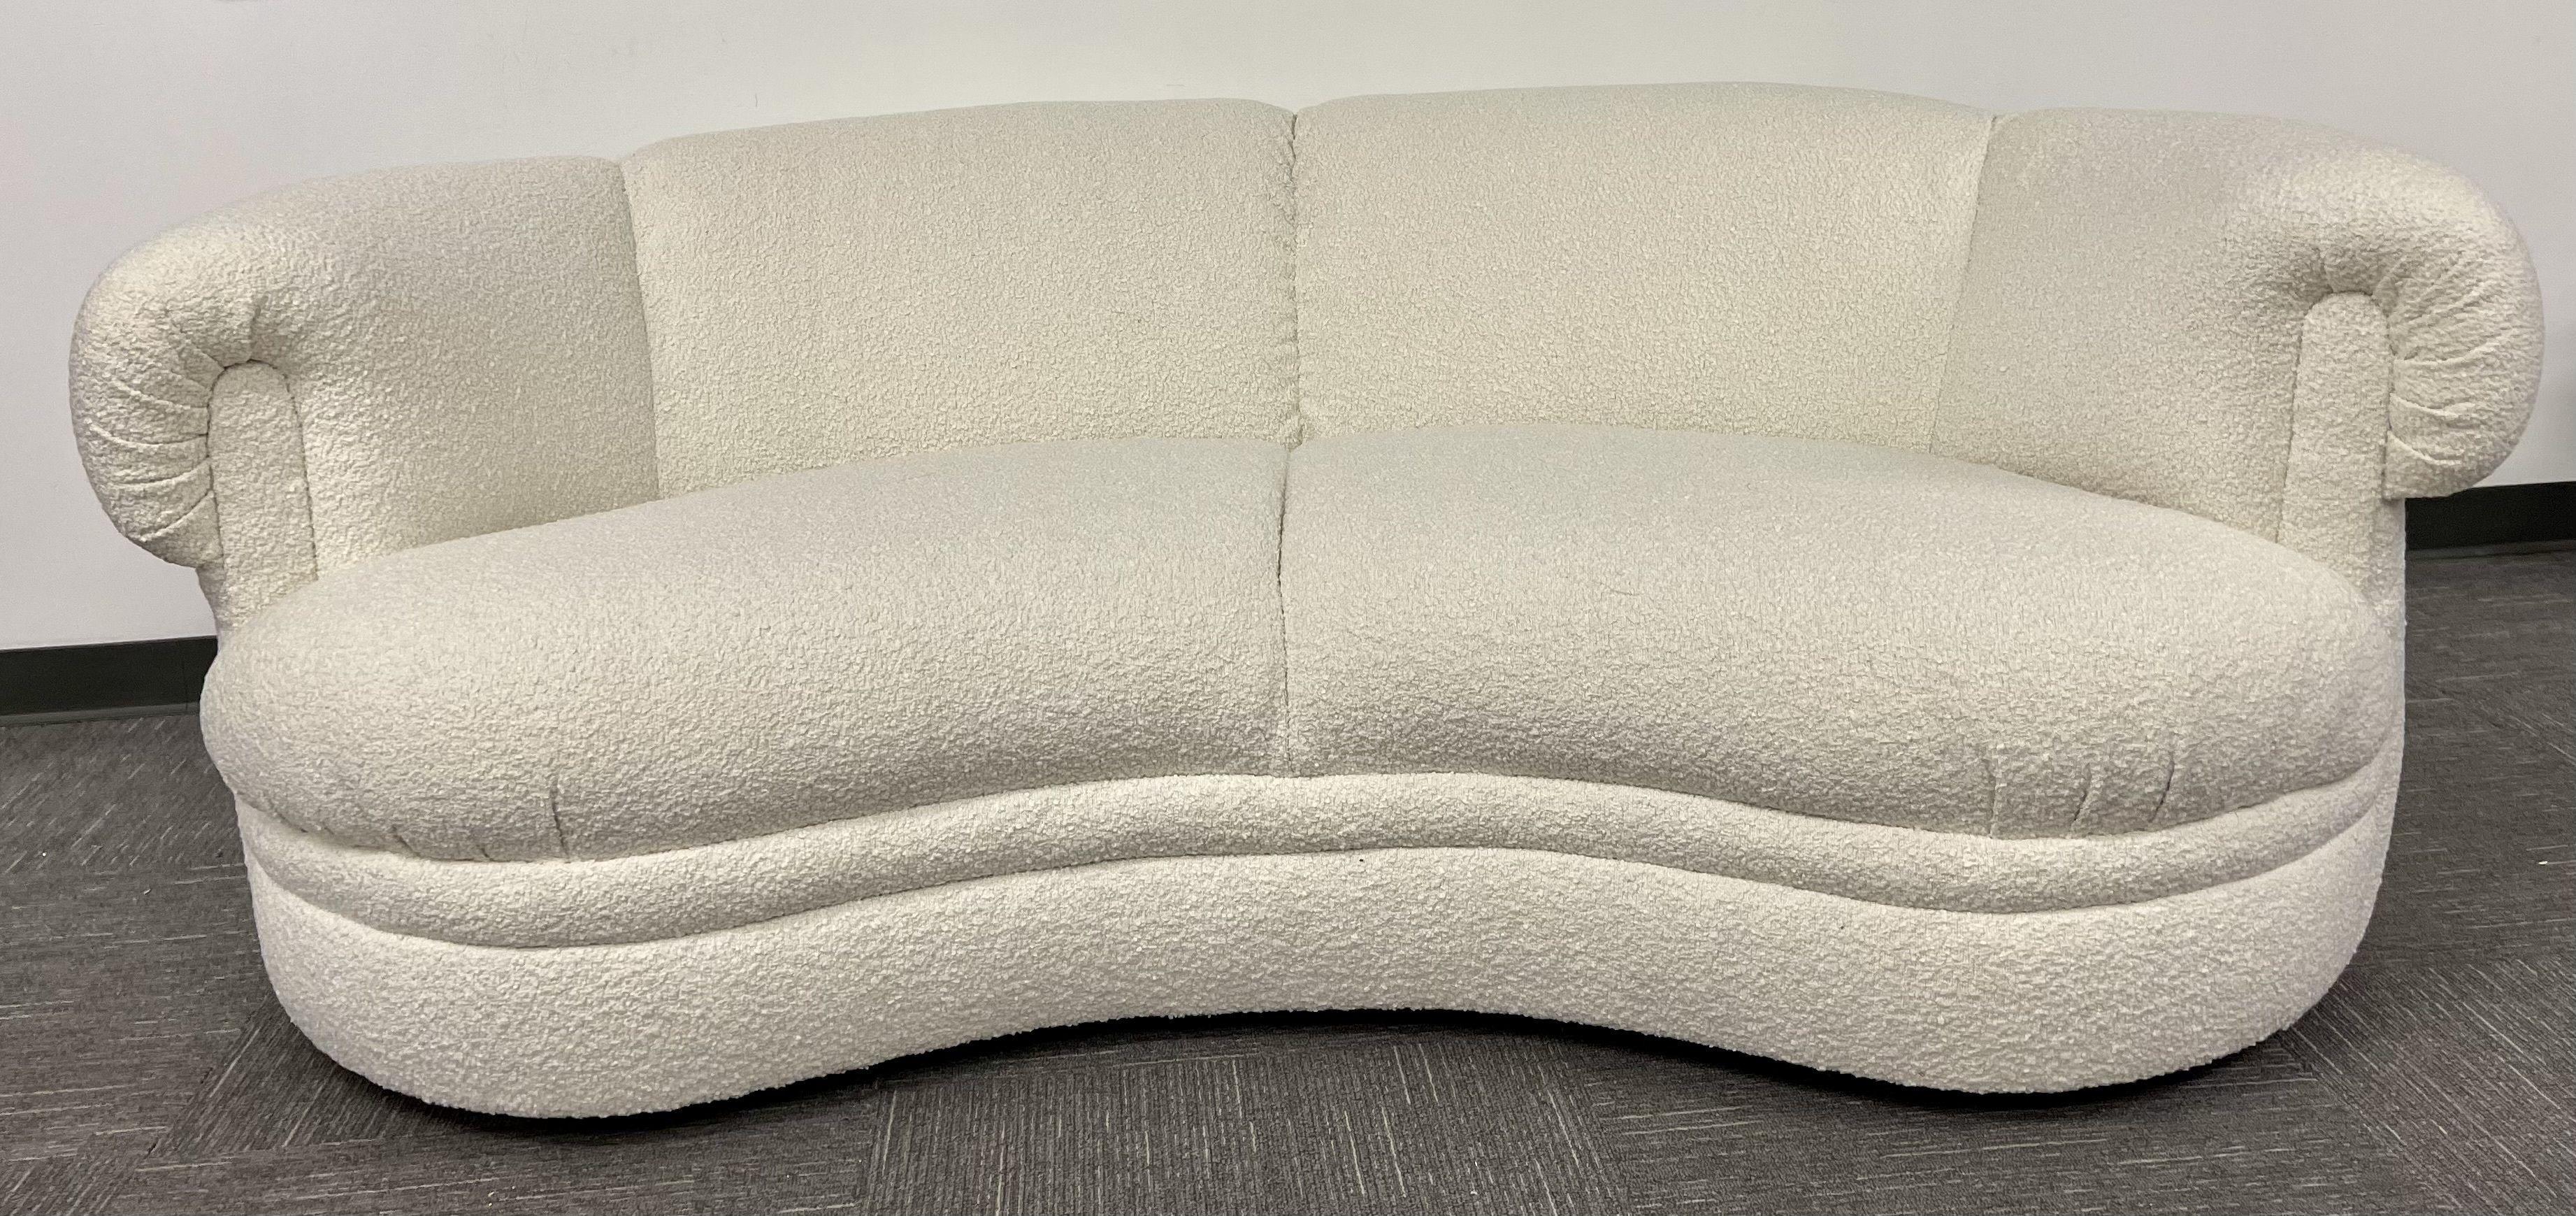 A Baker Cloud Sofa, Settee, Loveseat. New Boucle Fabric on this Baker Furniture Company Cloud Style Sofa or Settee. Great for any space in the home or office. The deep curved backrest would look stunning in the center of any home or office.
Seat